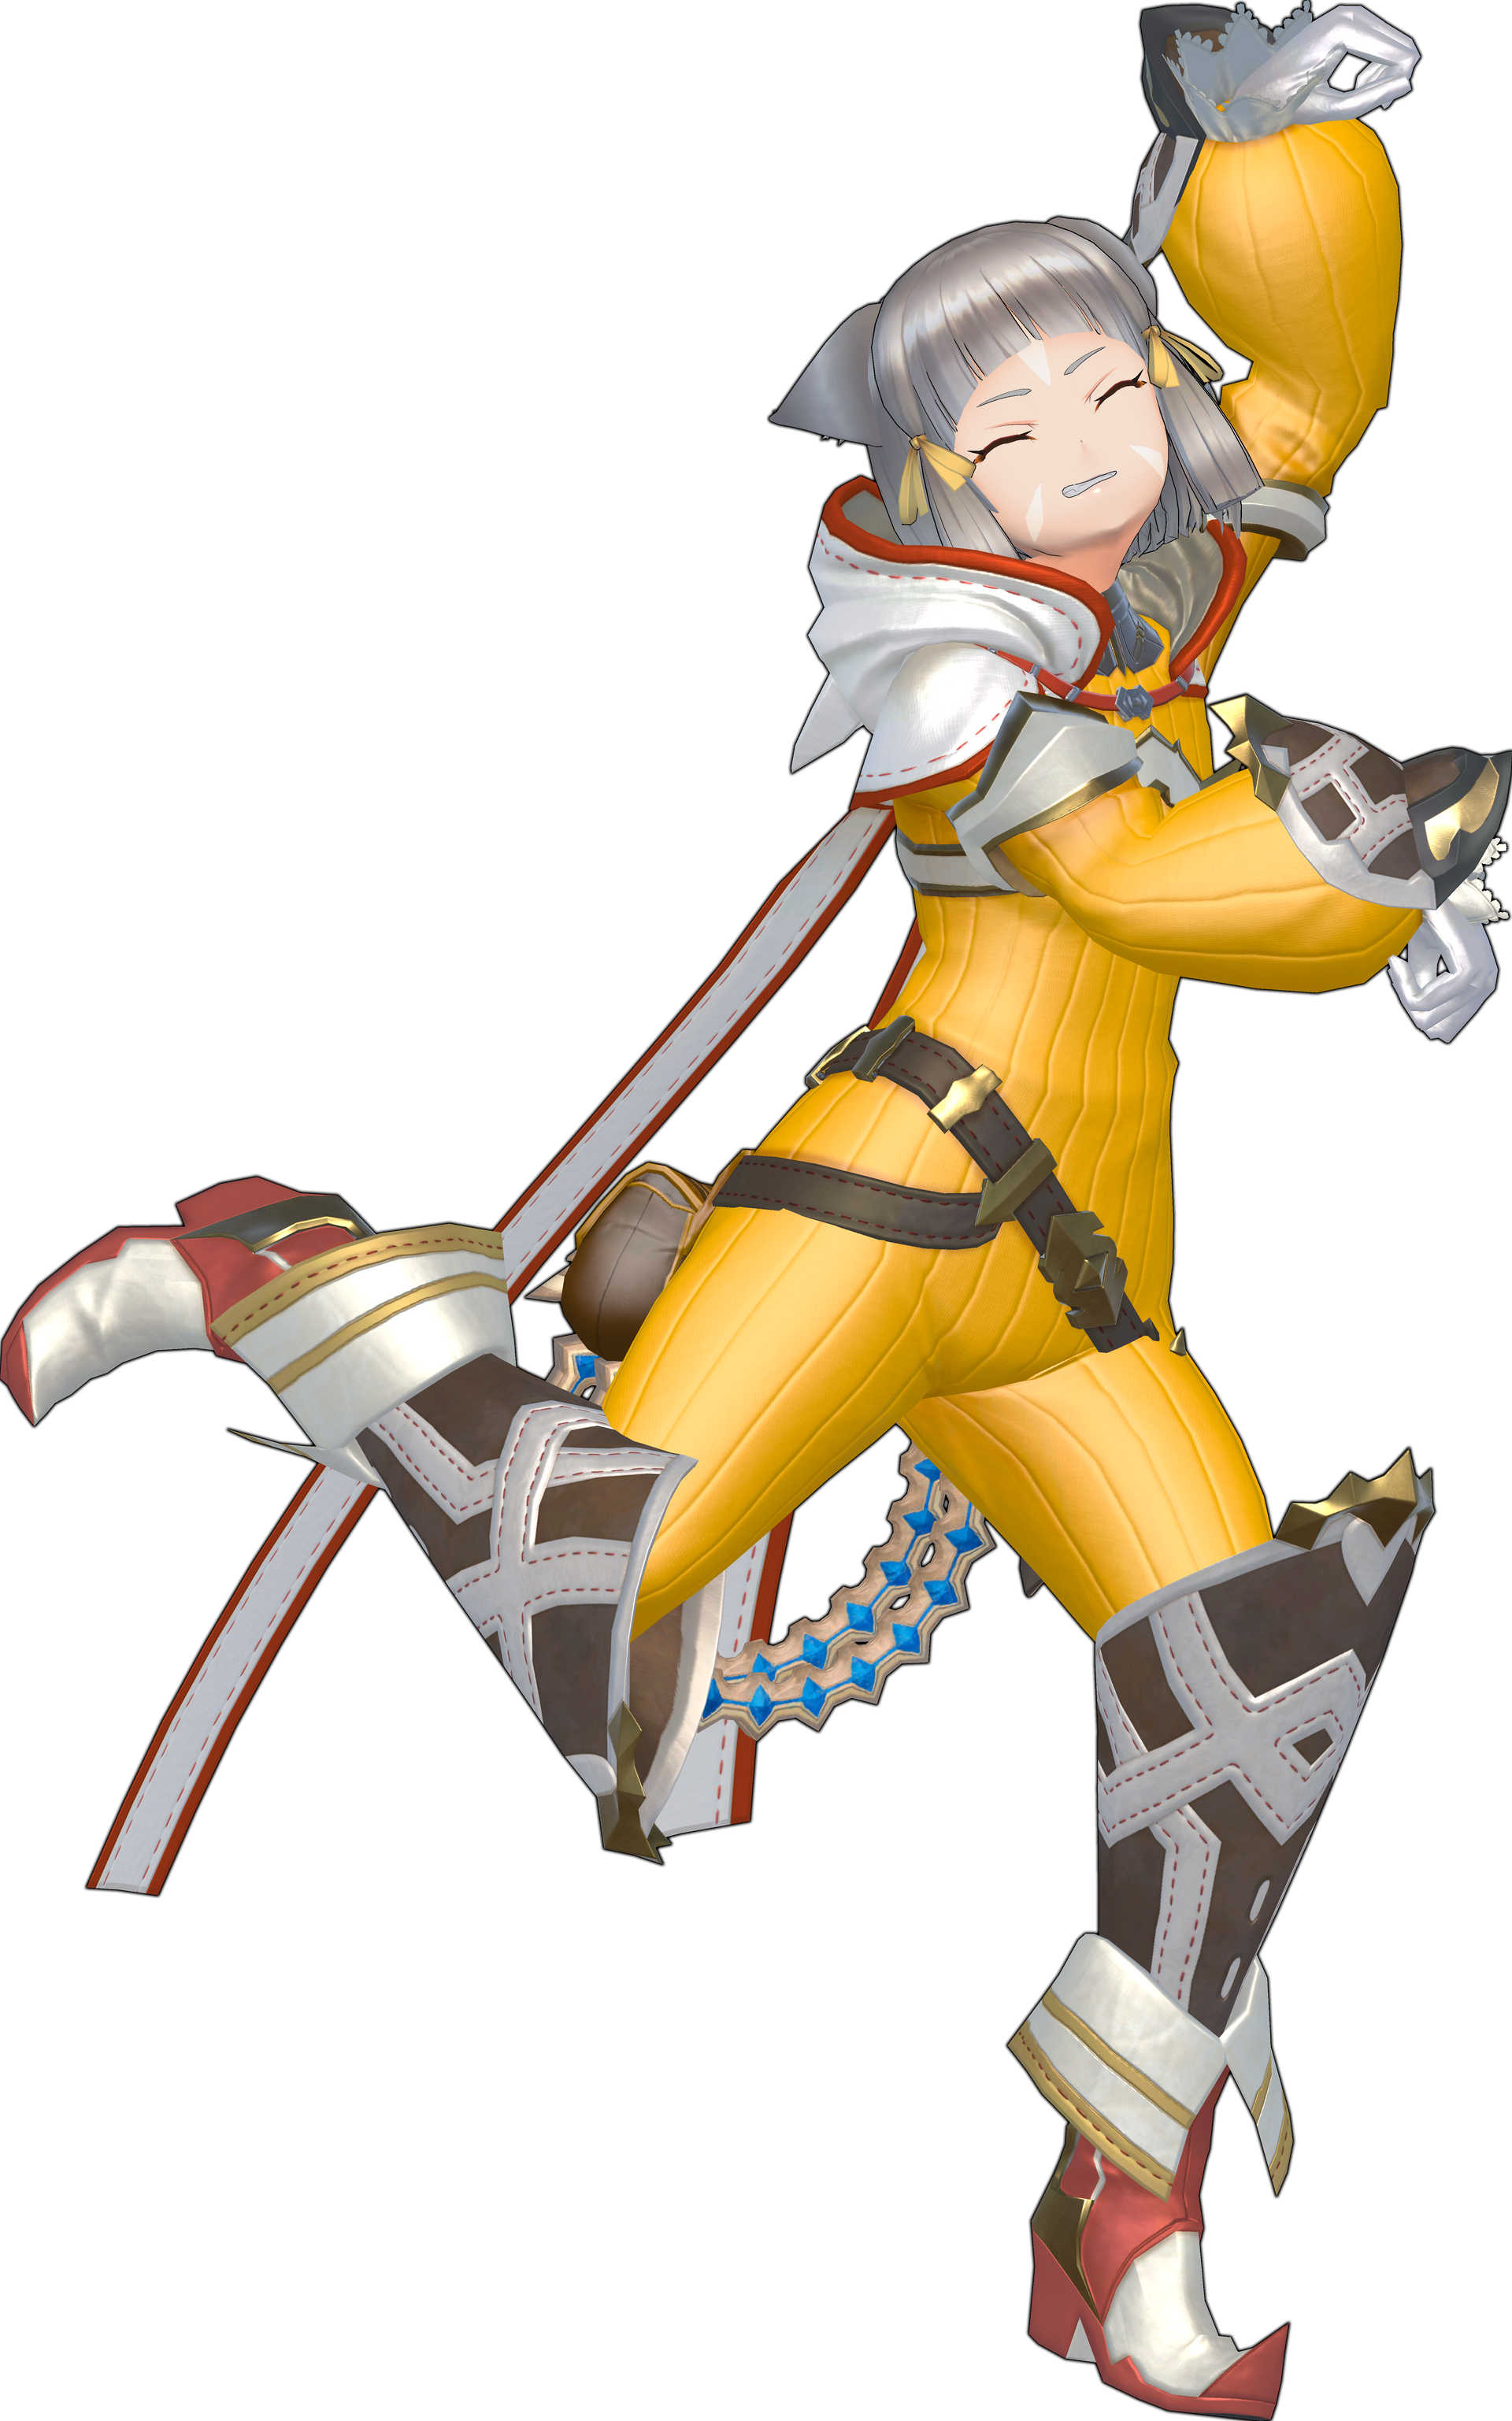 dancing_nia___xenoblade_chronicles_2_by_altiernate_ddbmyf7-fullview.png